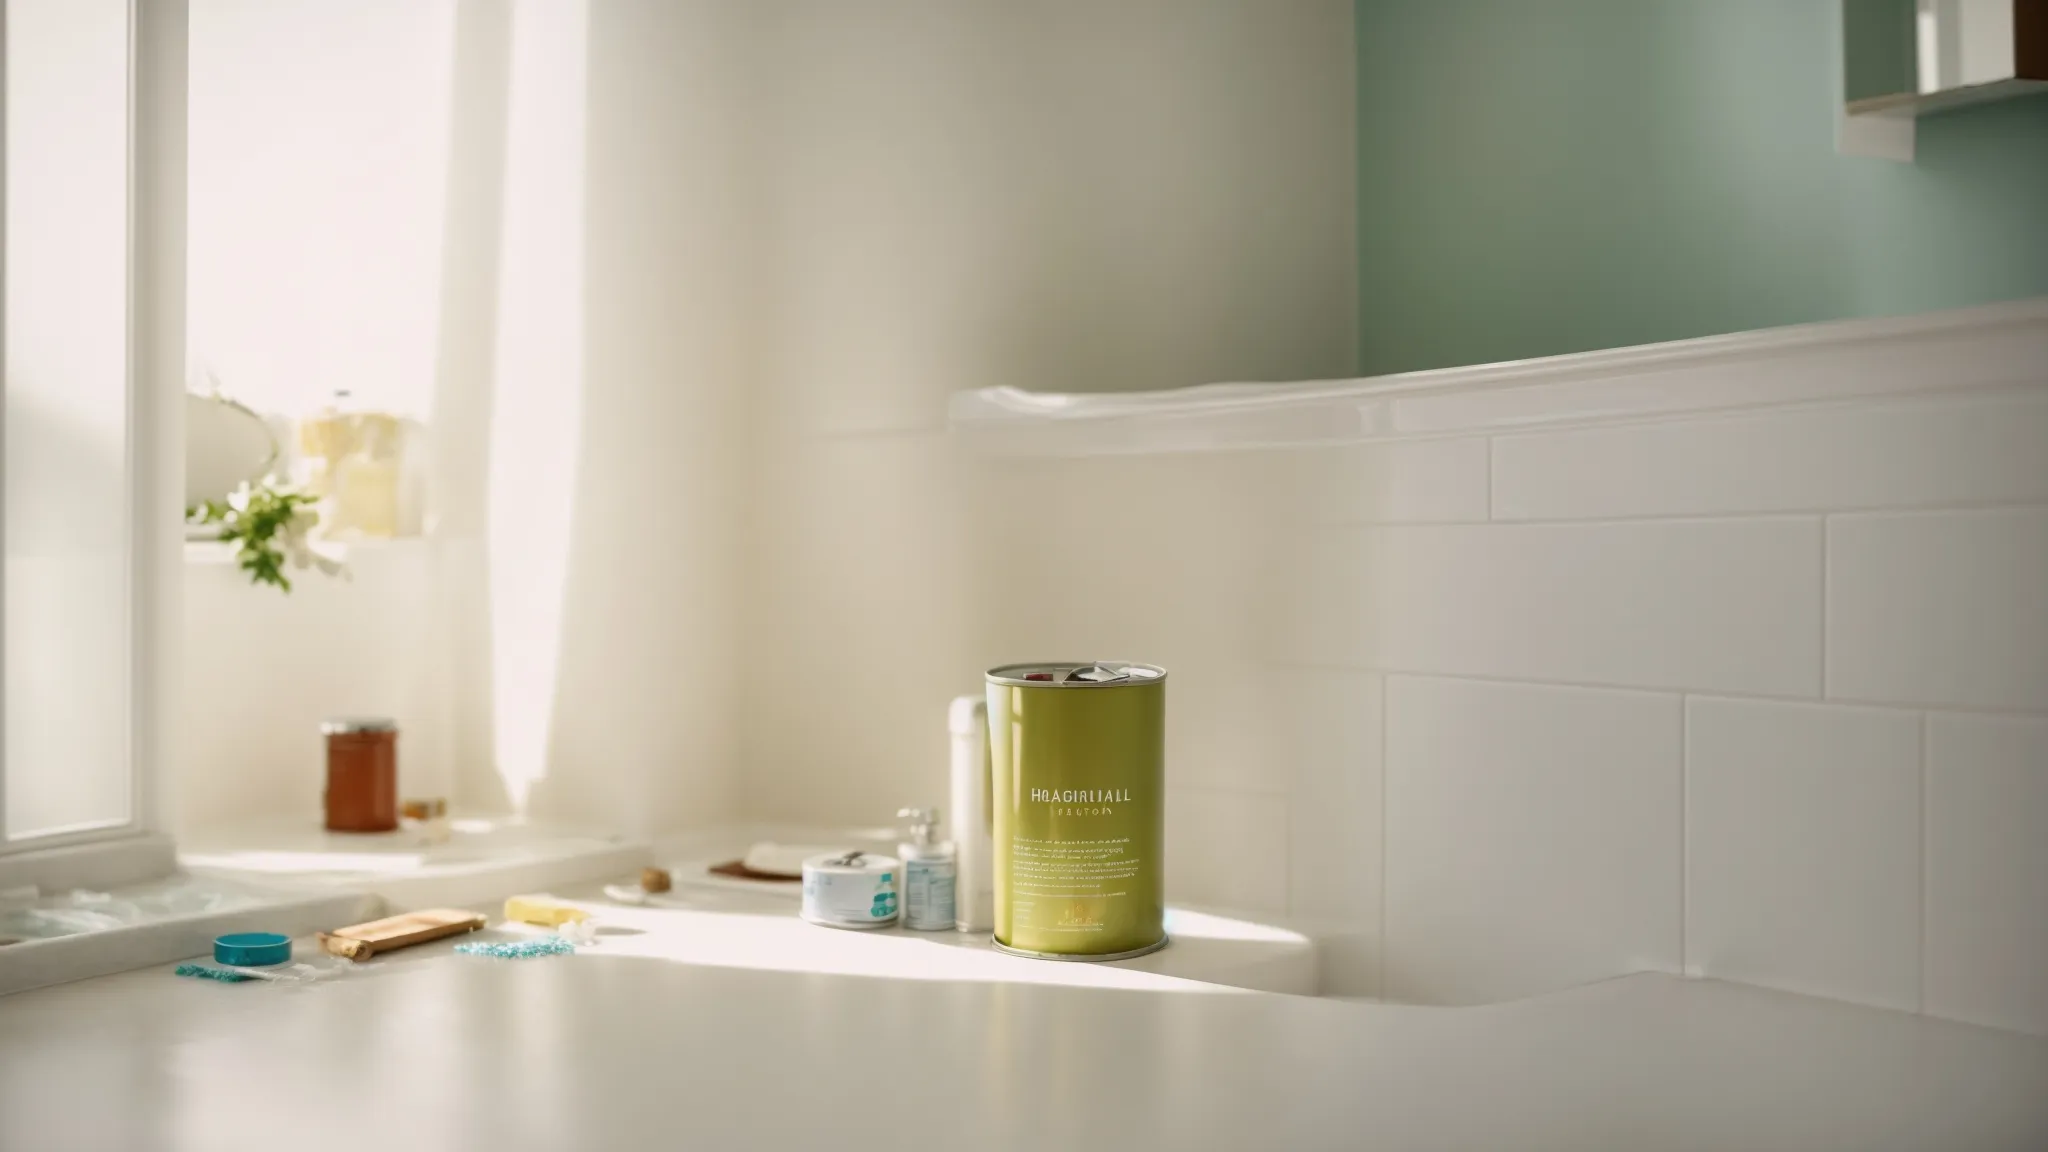 a bright, freshly painted commercial bathroom renovations with an open can of paint and a roller tray on the floor, illuminated by natural light.